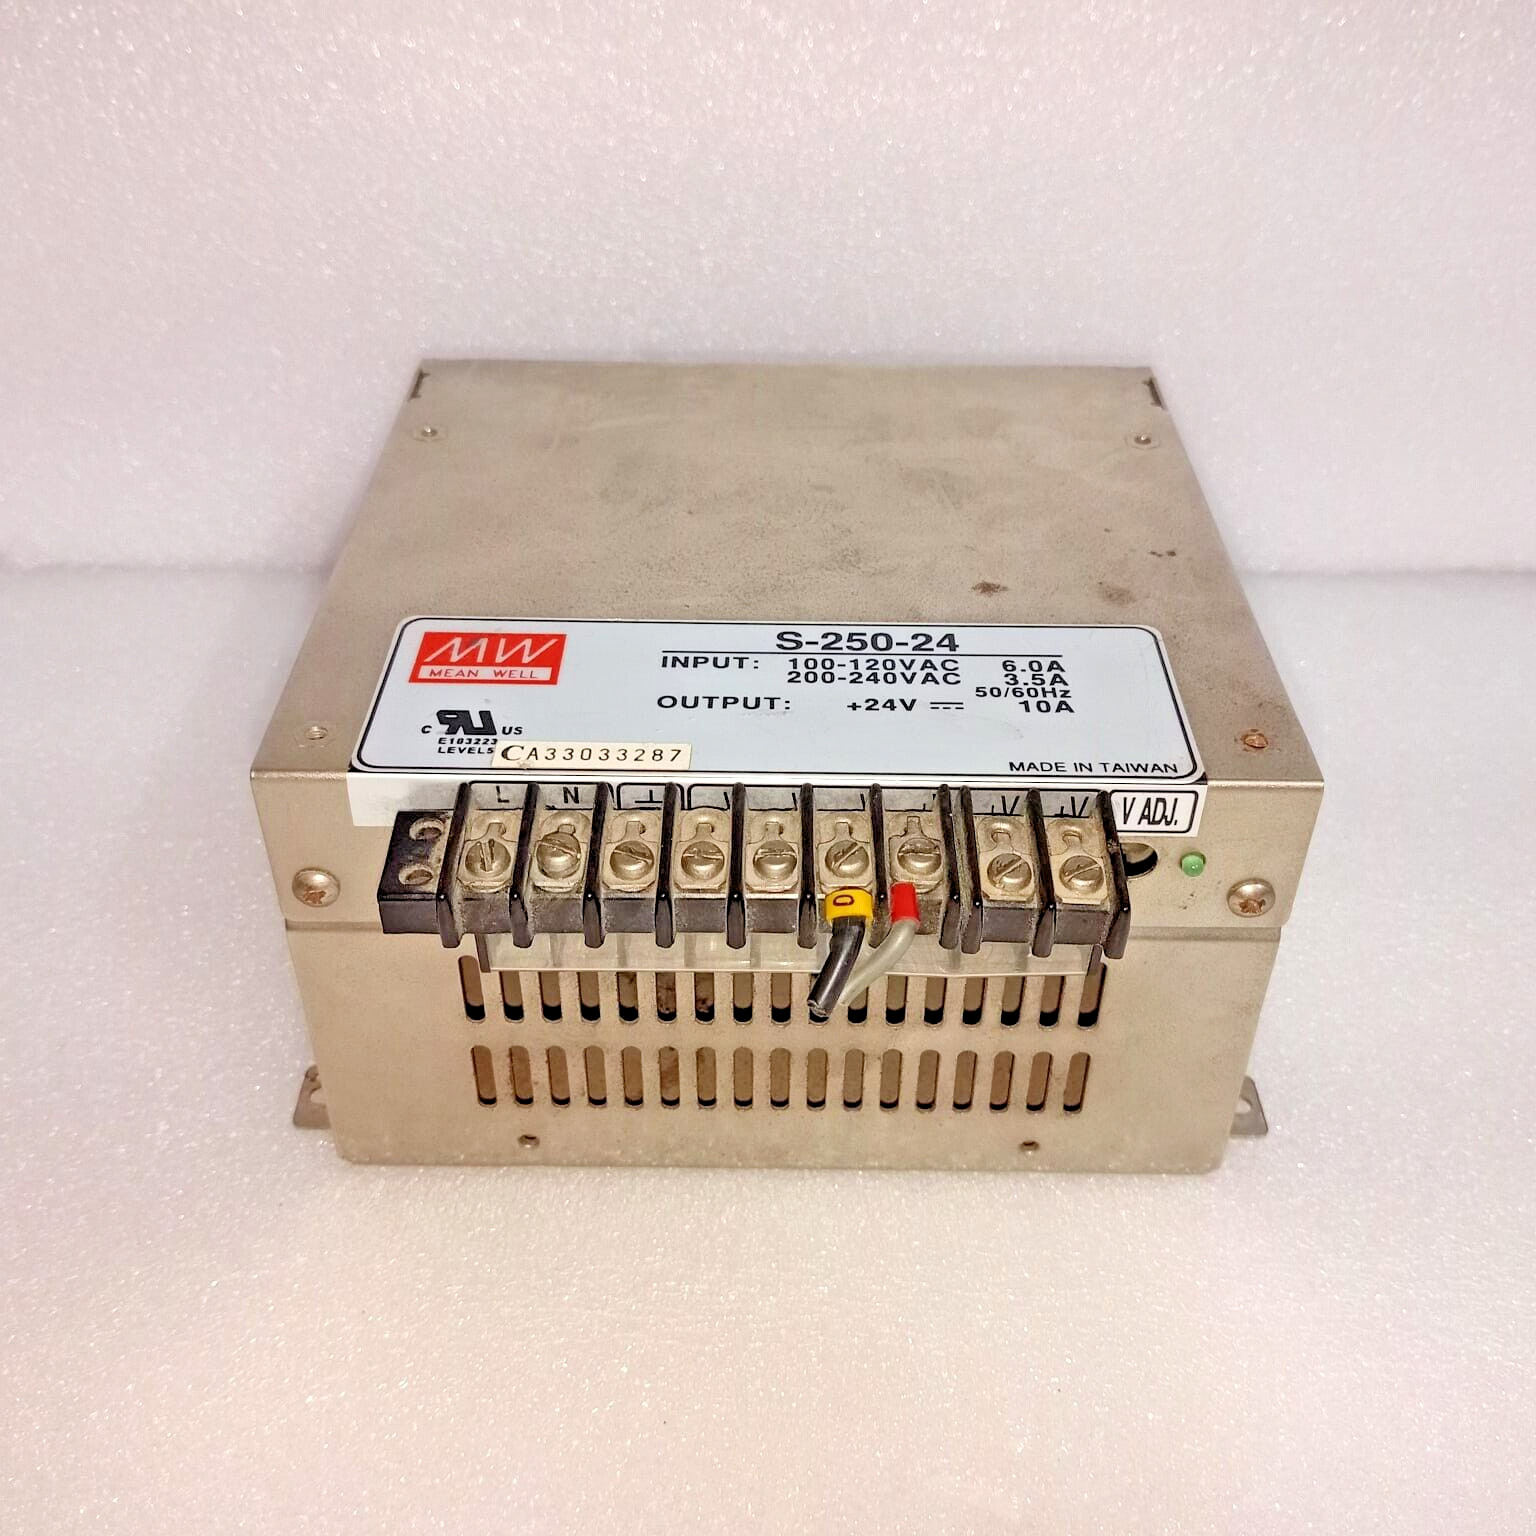 Mean Well S-250-24 POWER SUPPLY 10 AMP  Supply 100-120 VAC 200-240VAC Output 24V